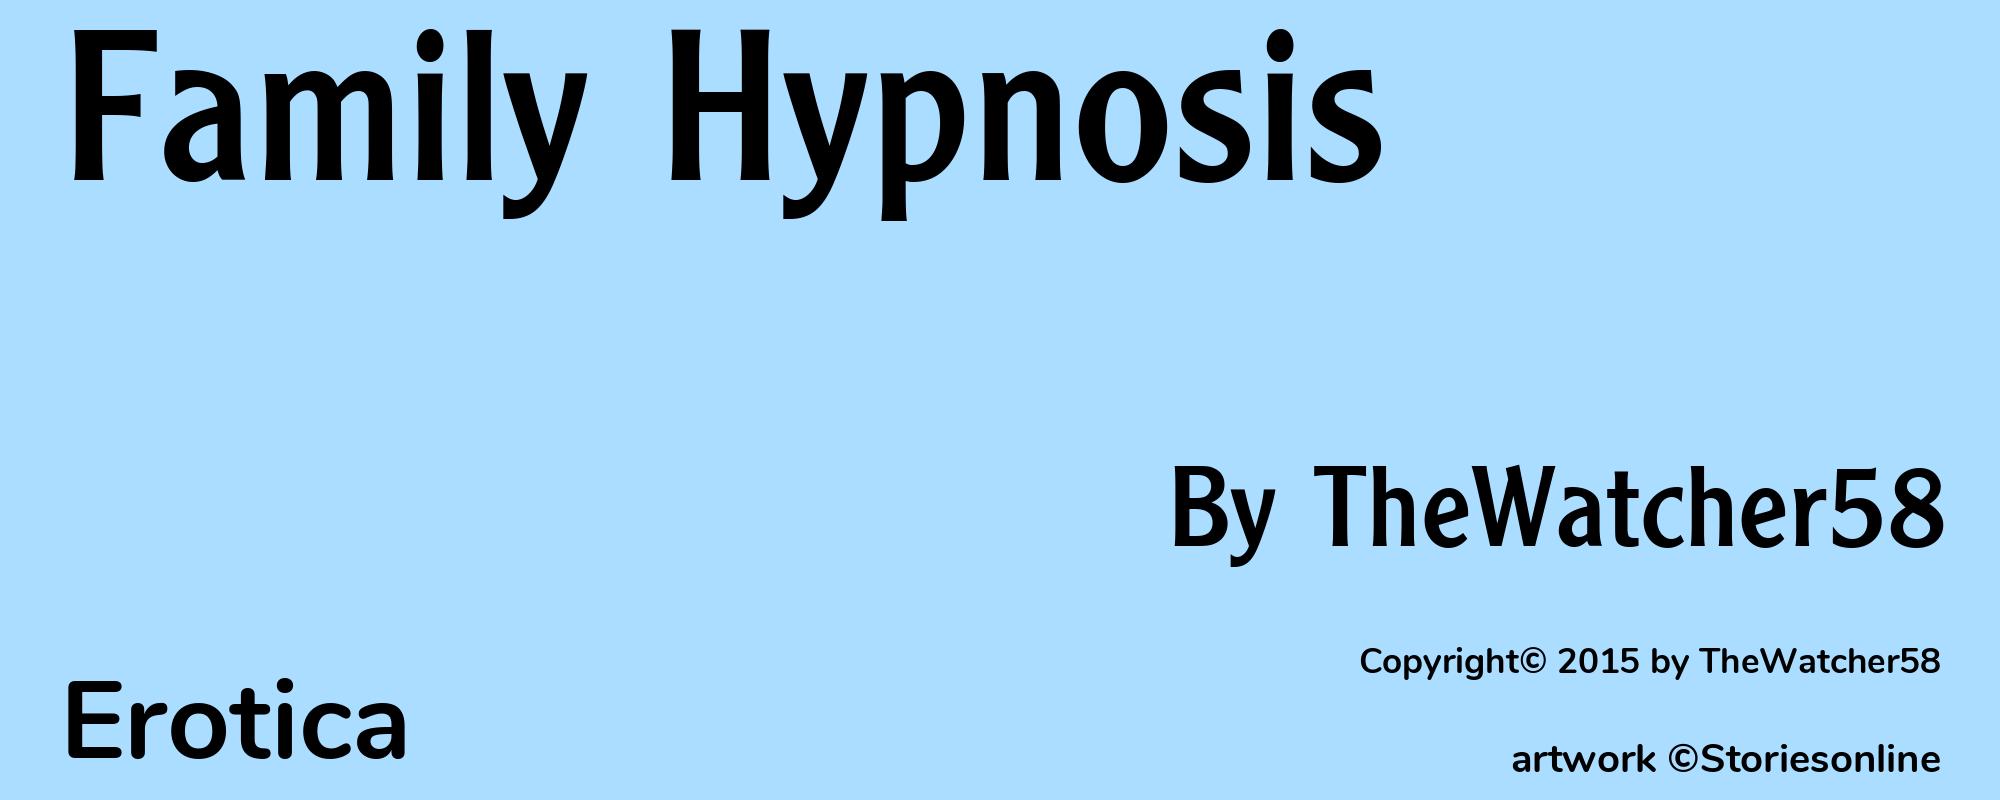 Family Hypnosis - Cover